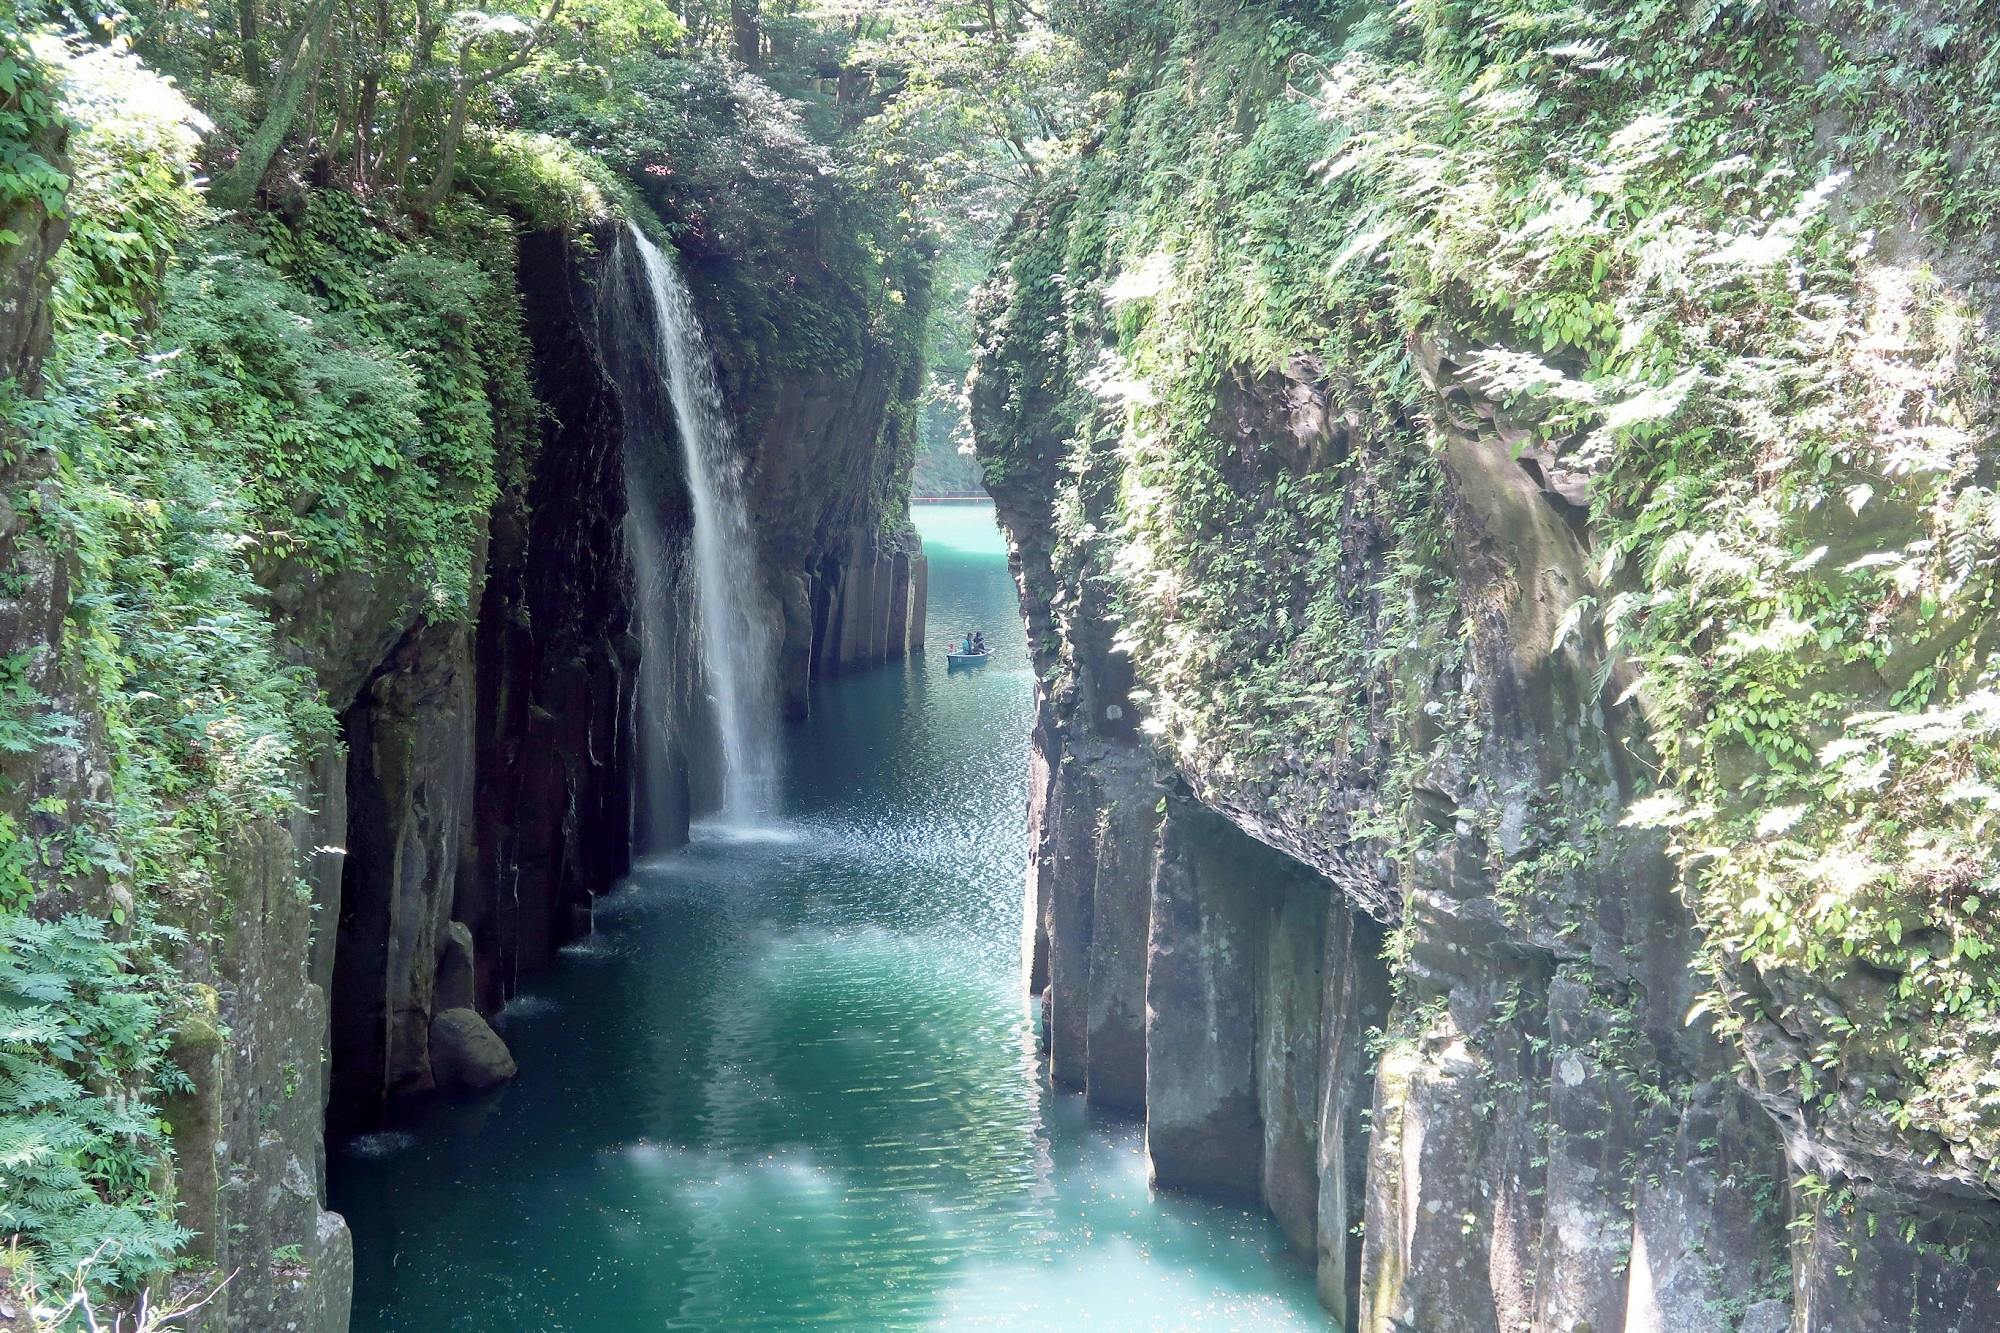 One day private minibus tour to Takachiho from Fukuoka Musement